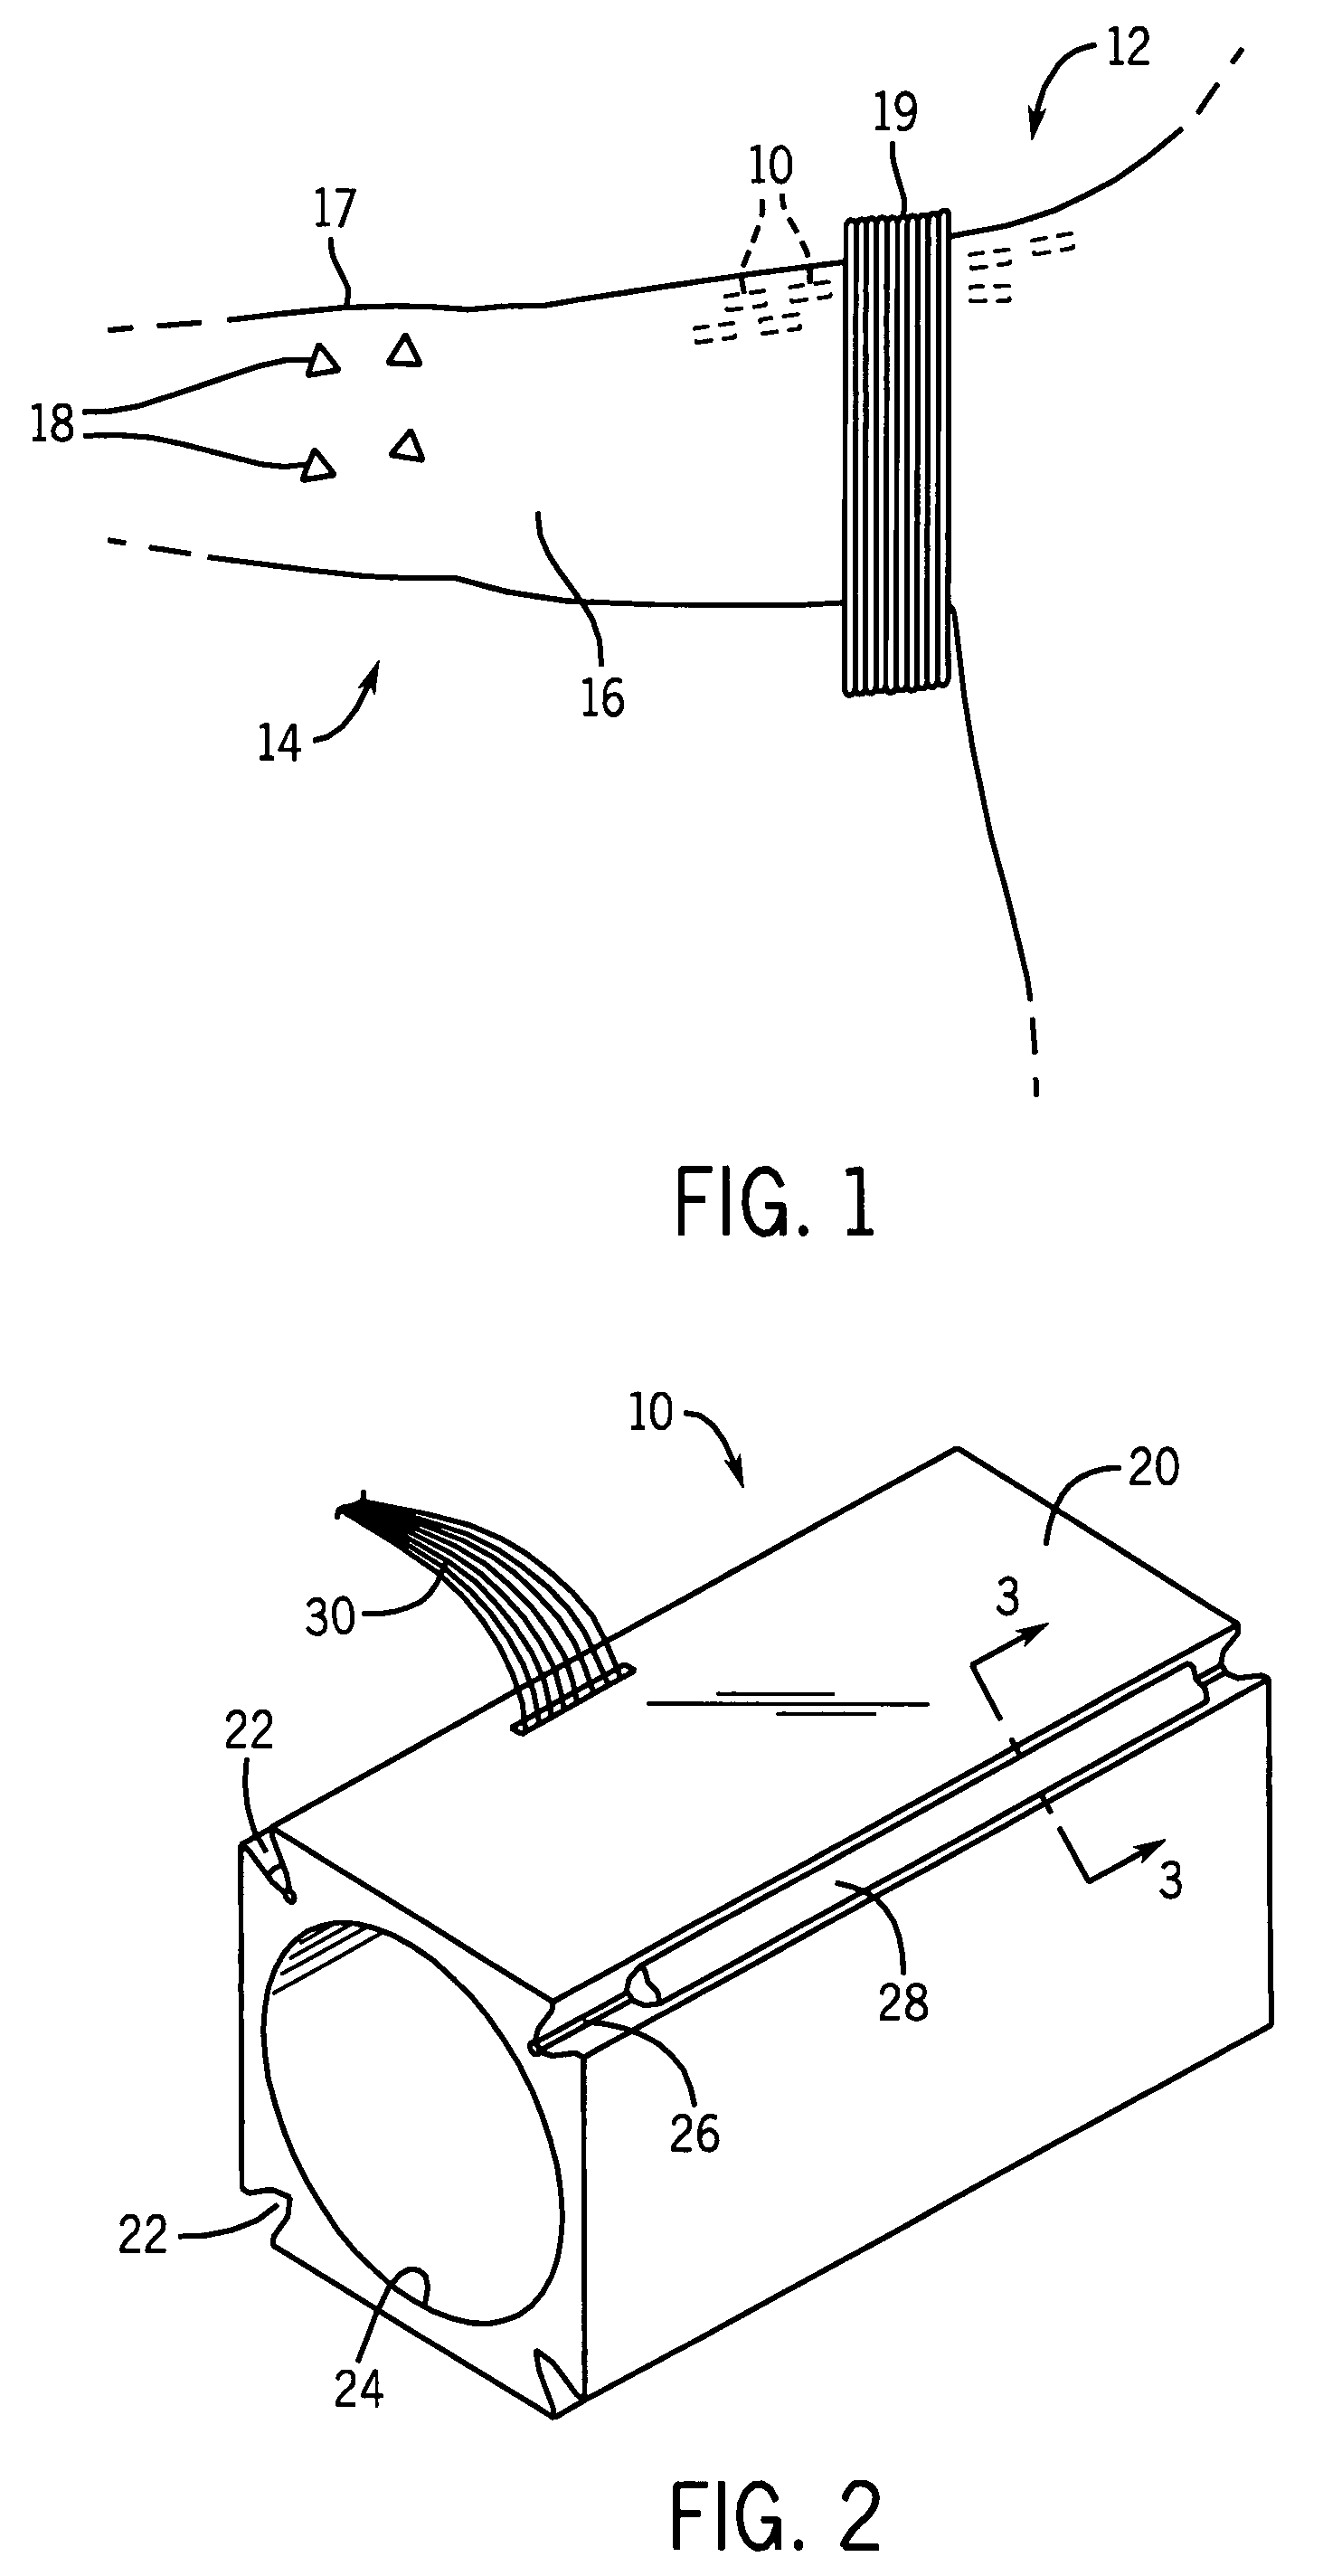 Grooved electrode and wireless microtransponder system